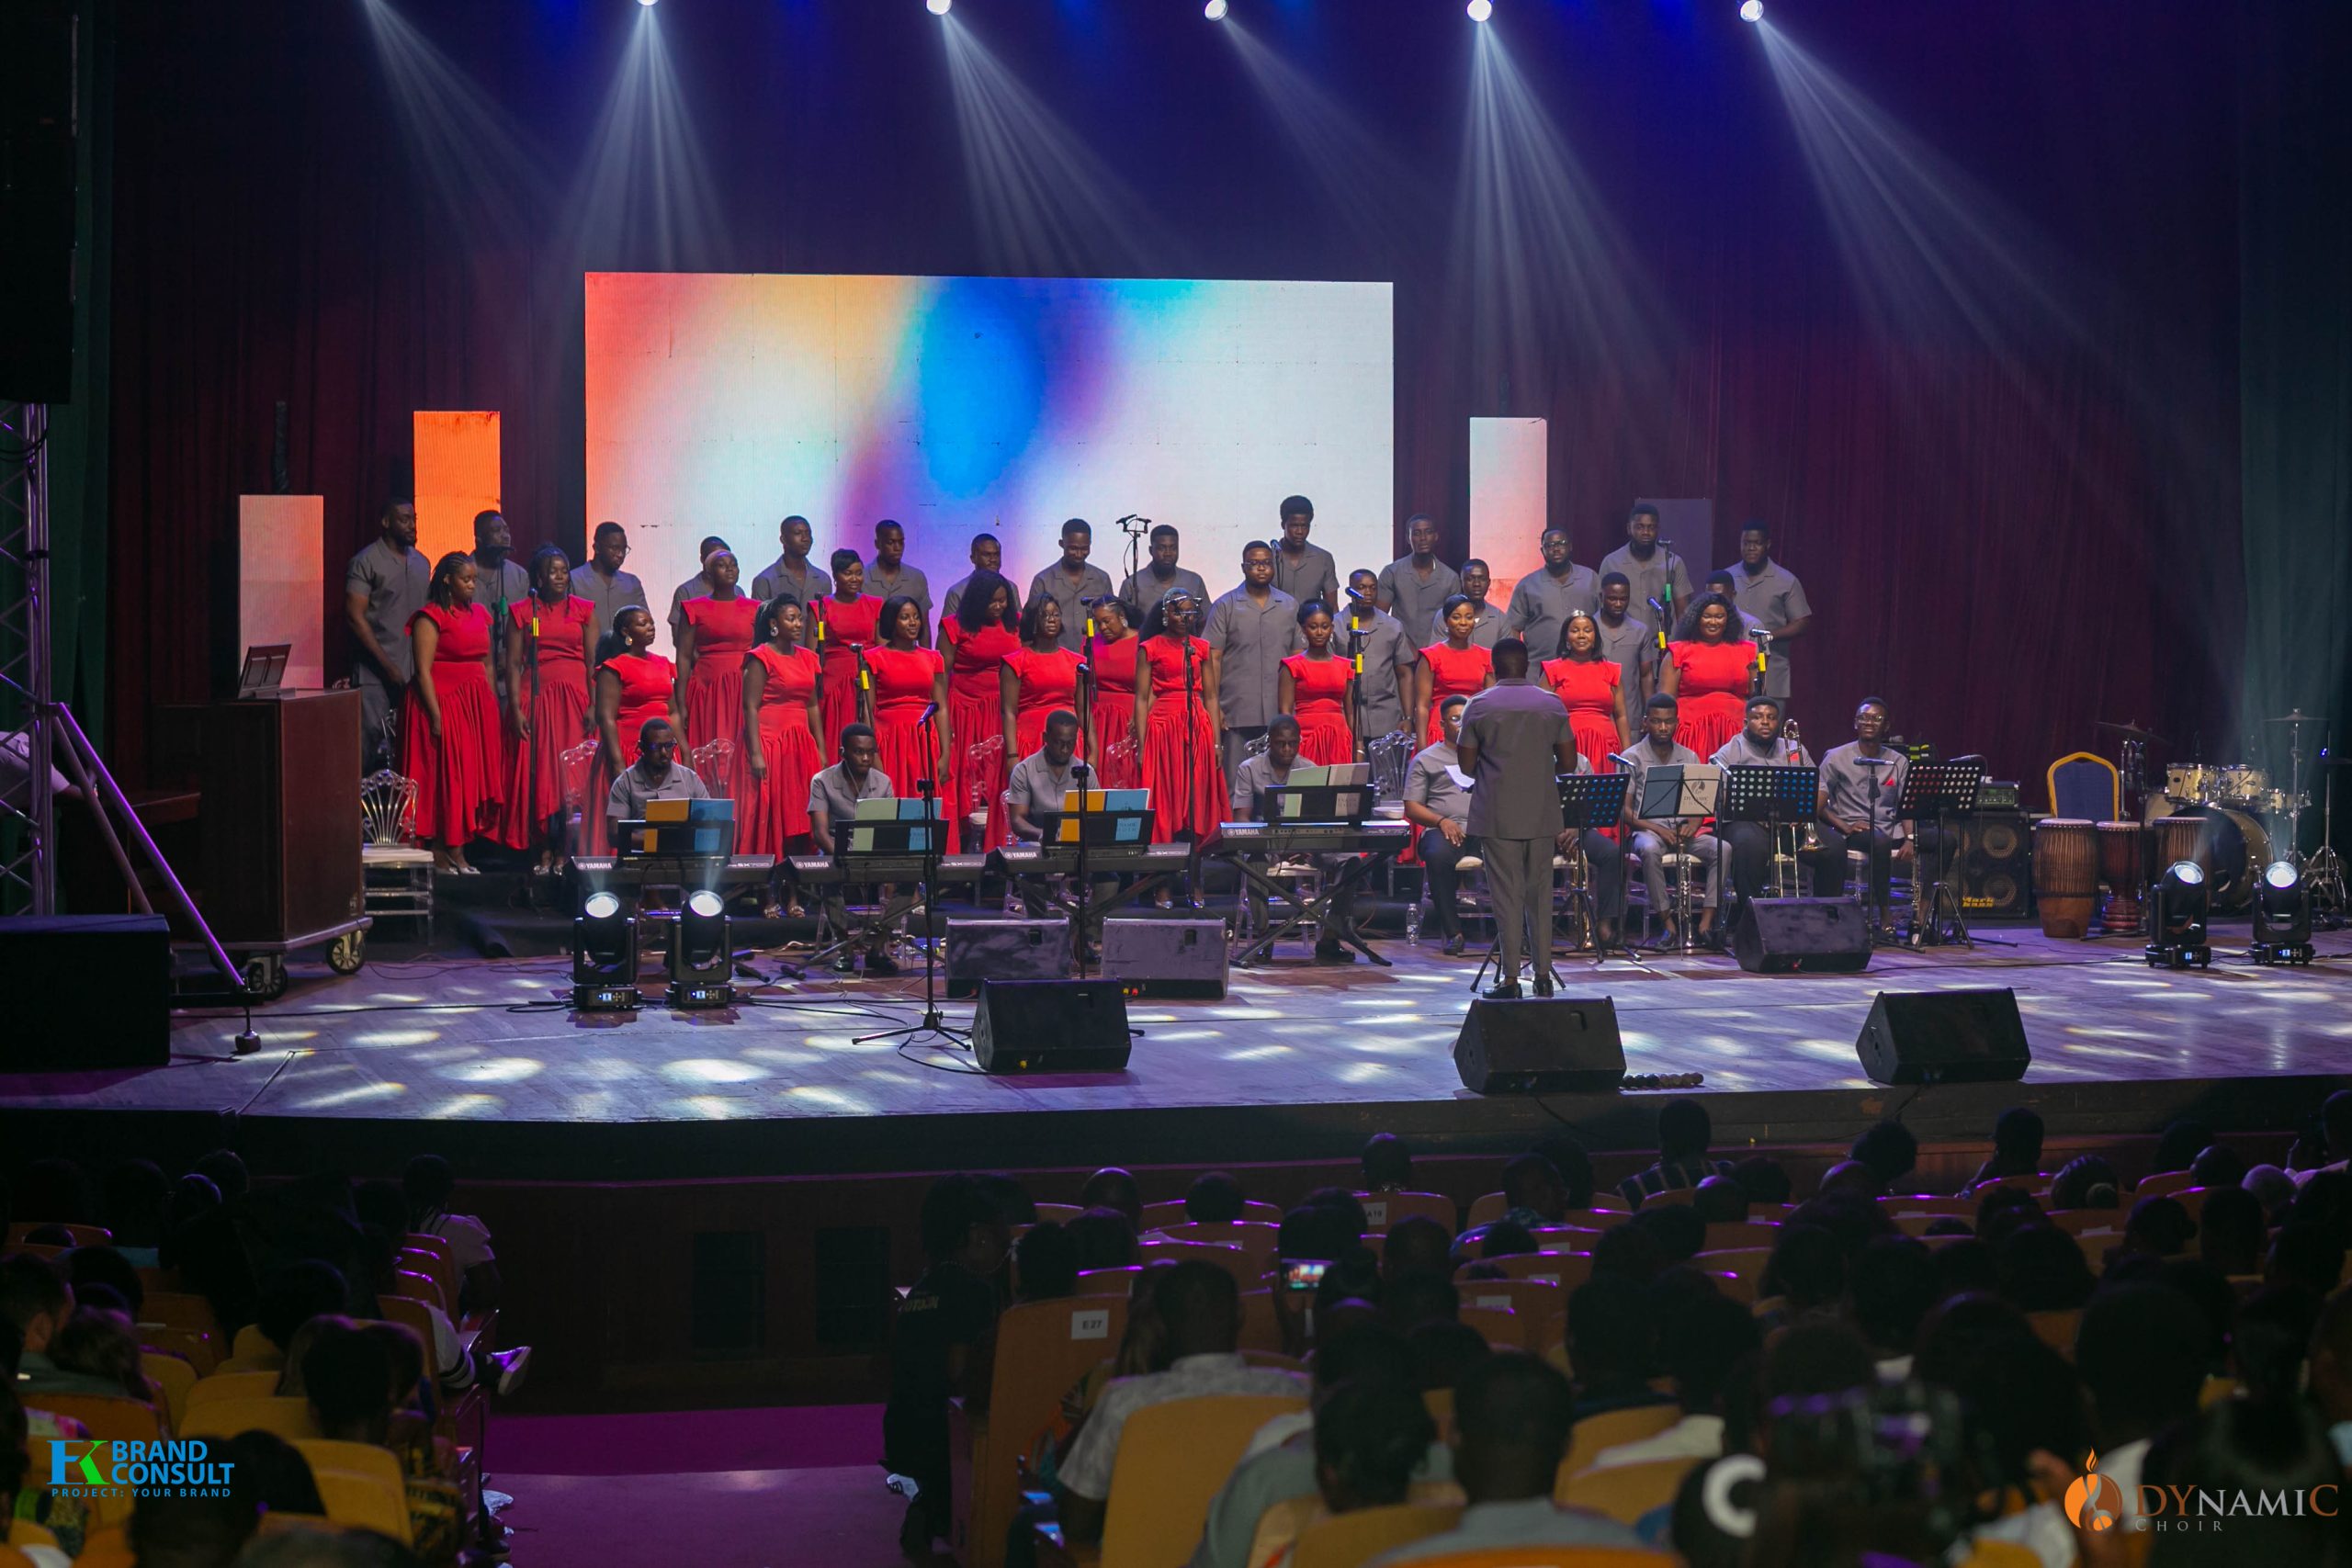 Dynamic Choir: A night of music, unity, and remembrance